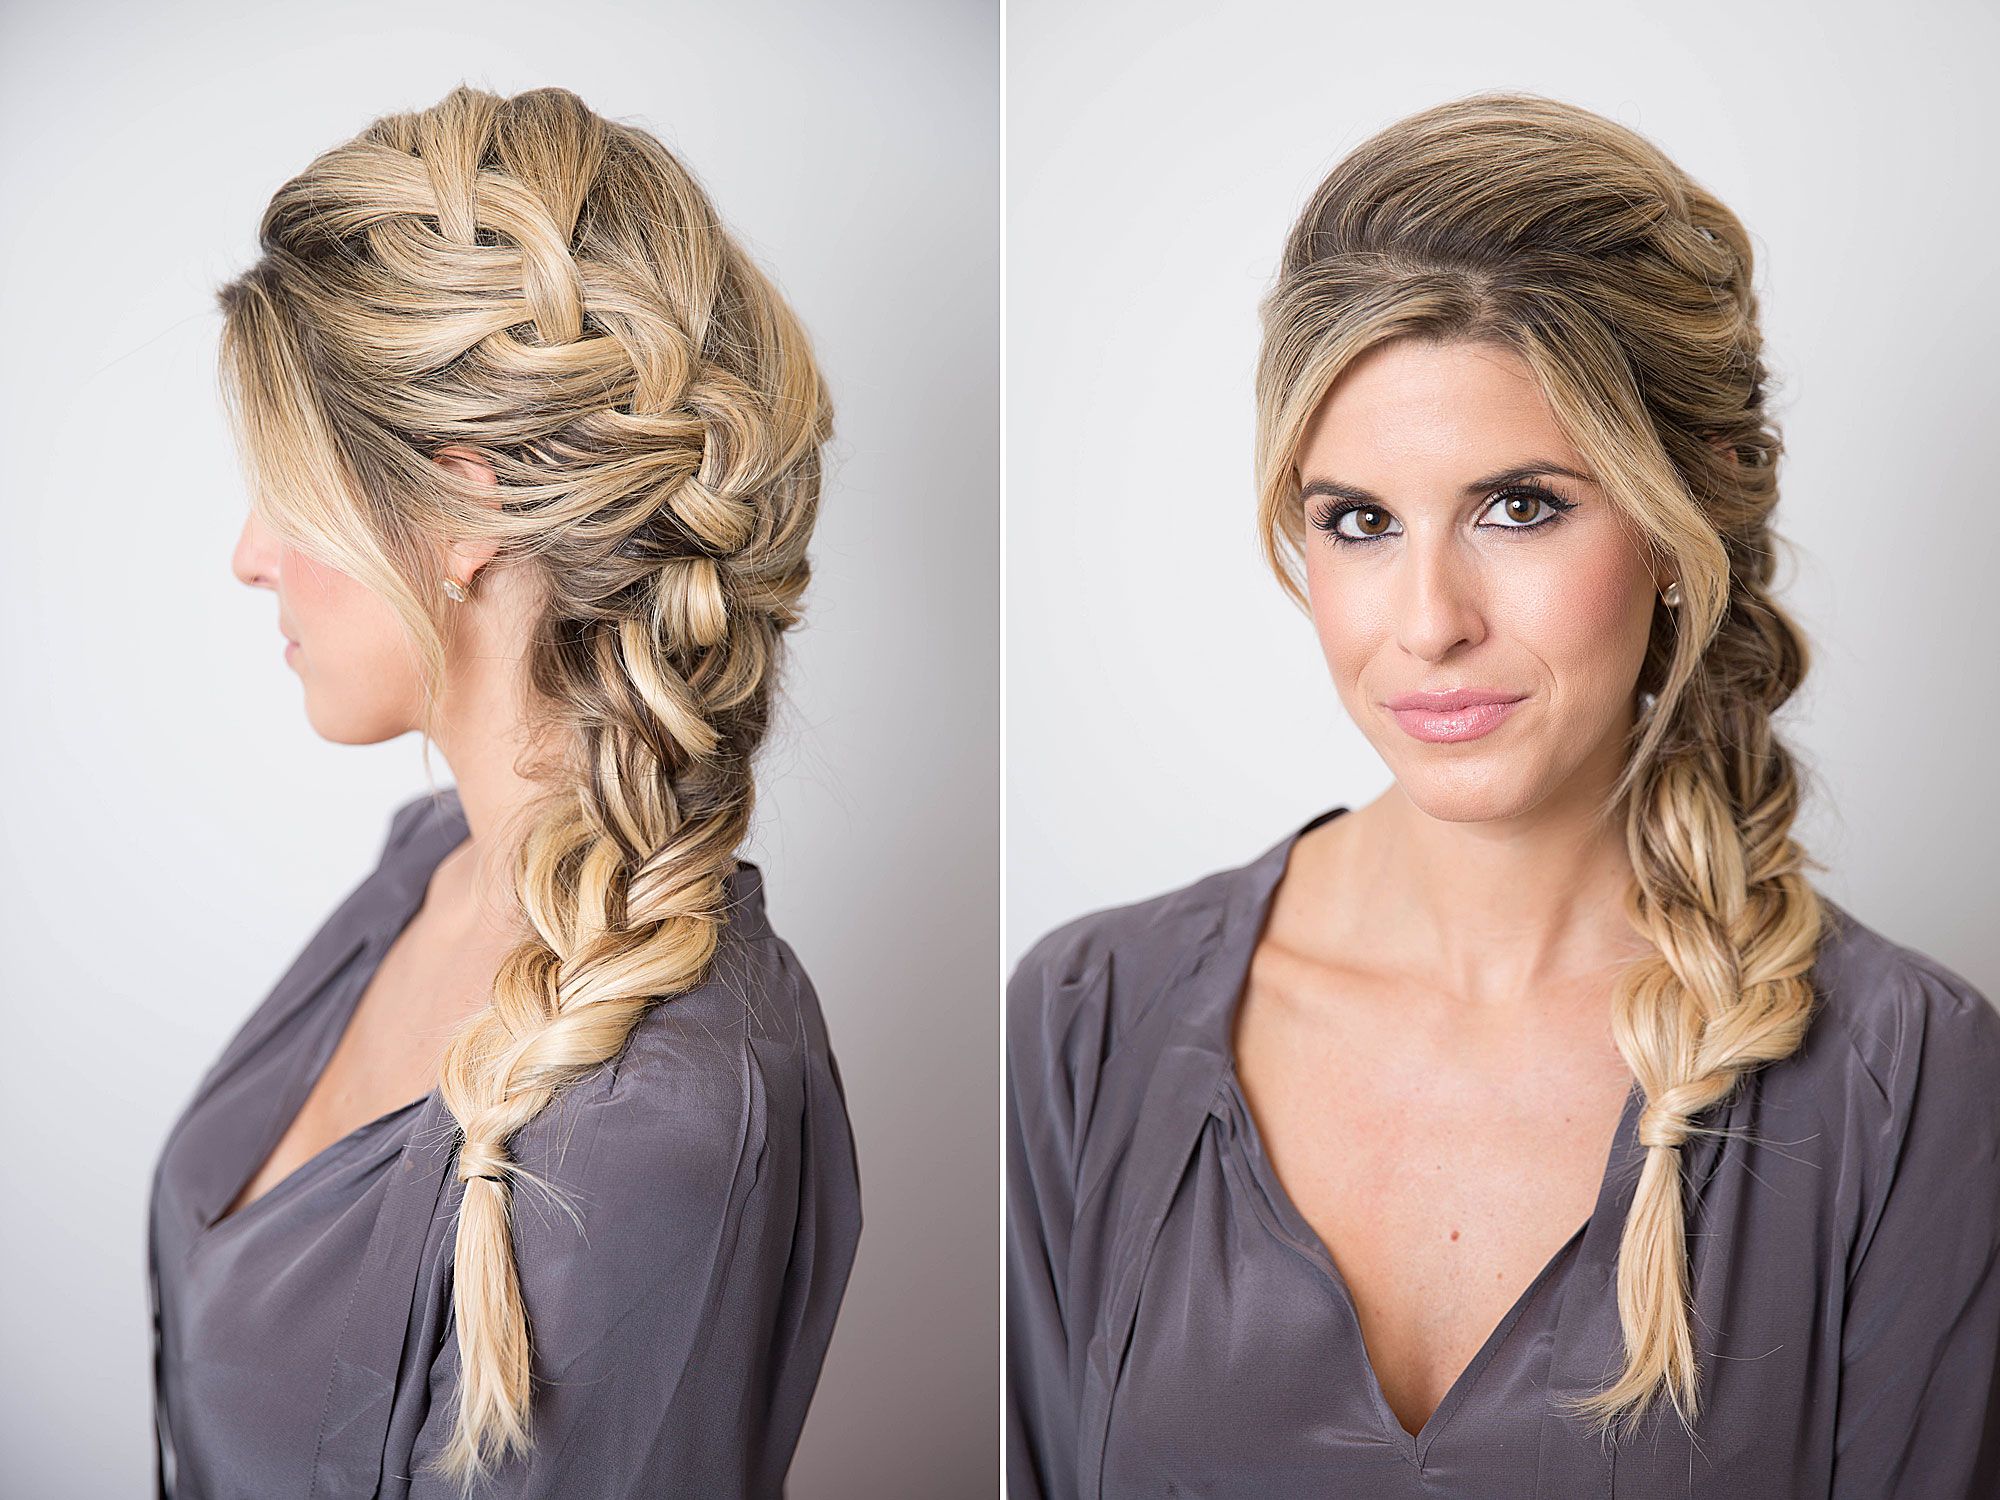 17 braided hairstyles with gifs - how to do every type of braid